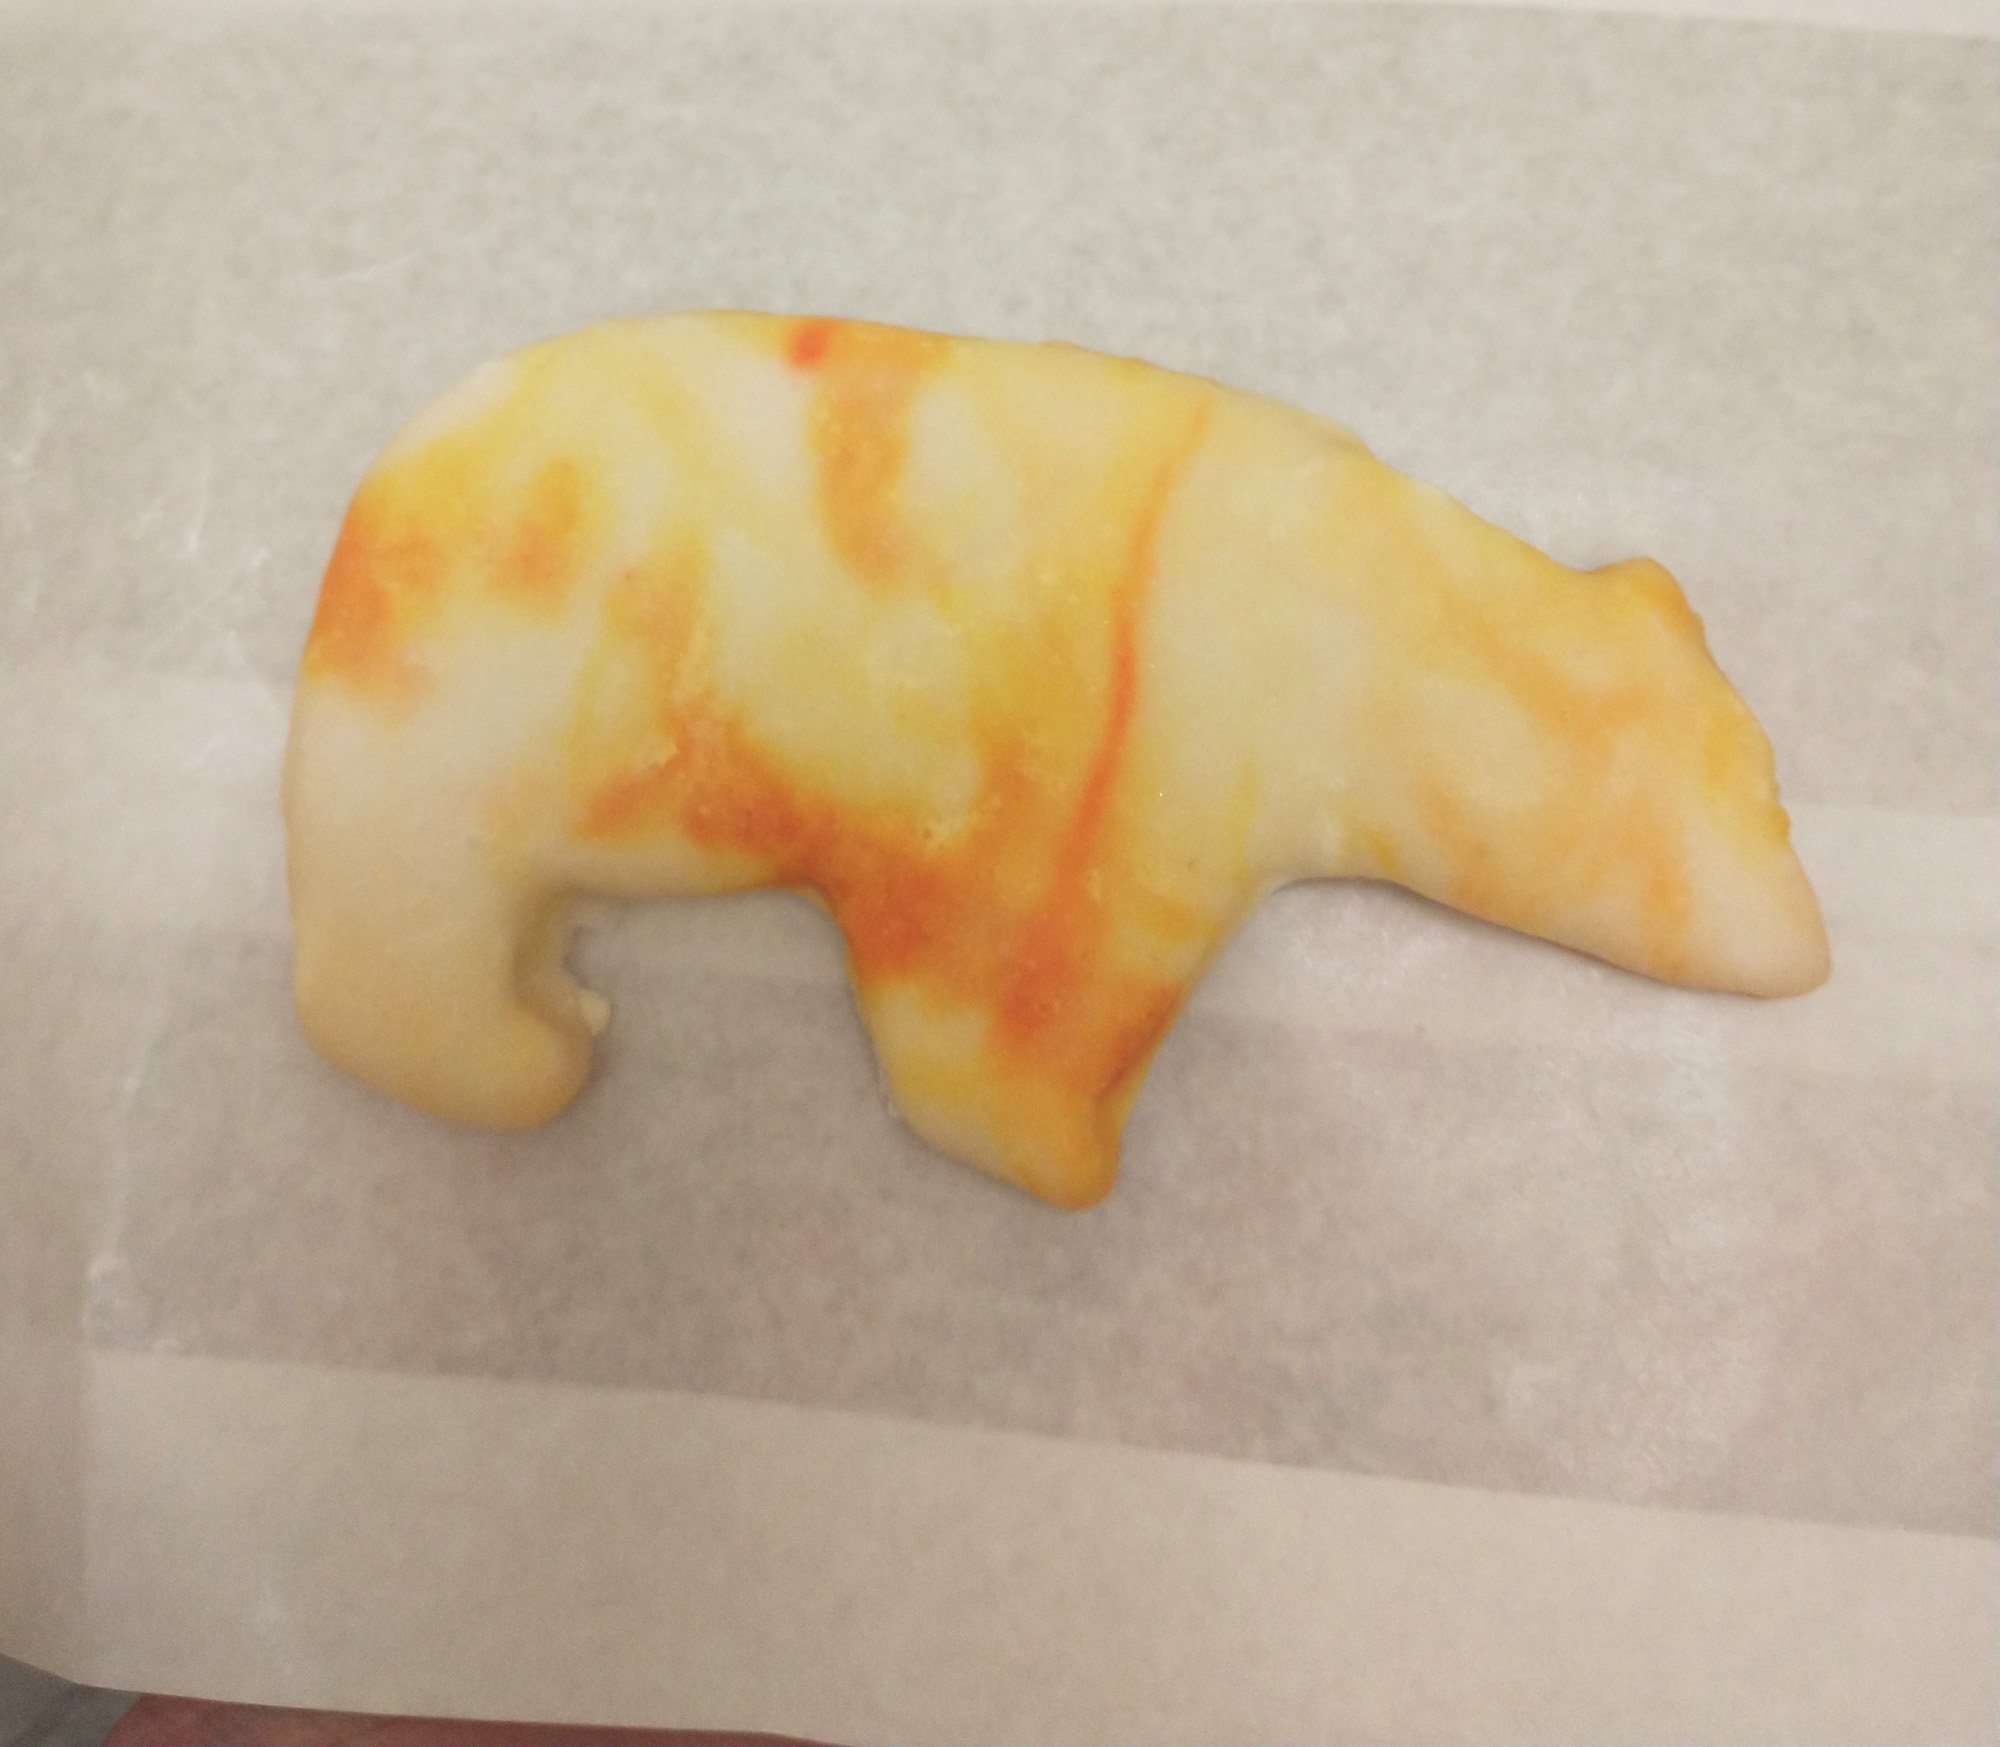 Got a bear-shaped sugar cookie to start my day off on the right side. Need that vitamin B.